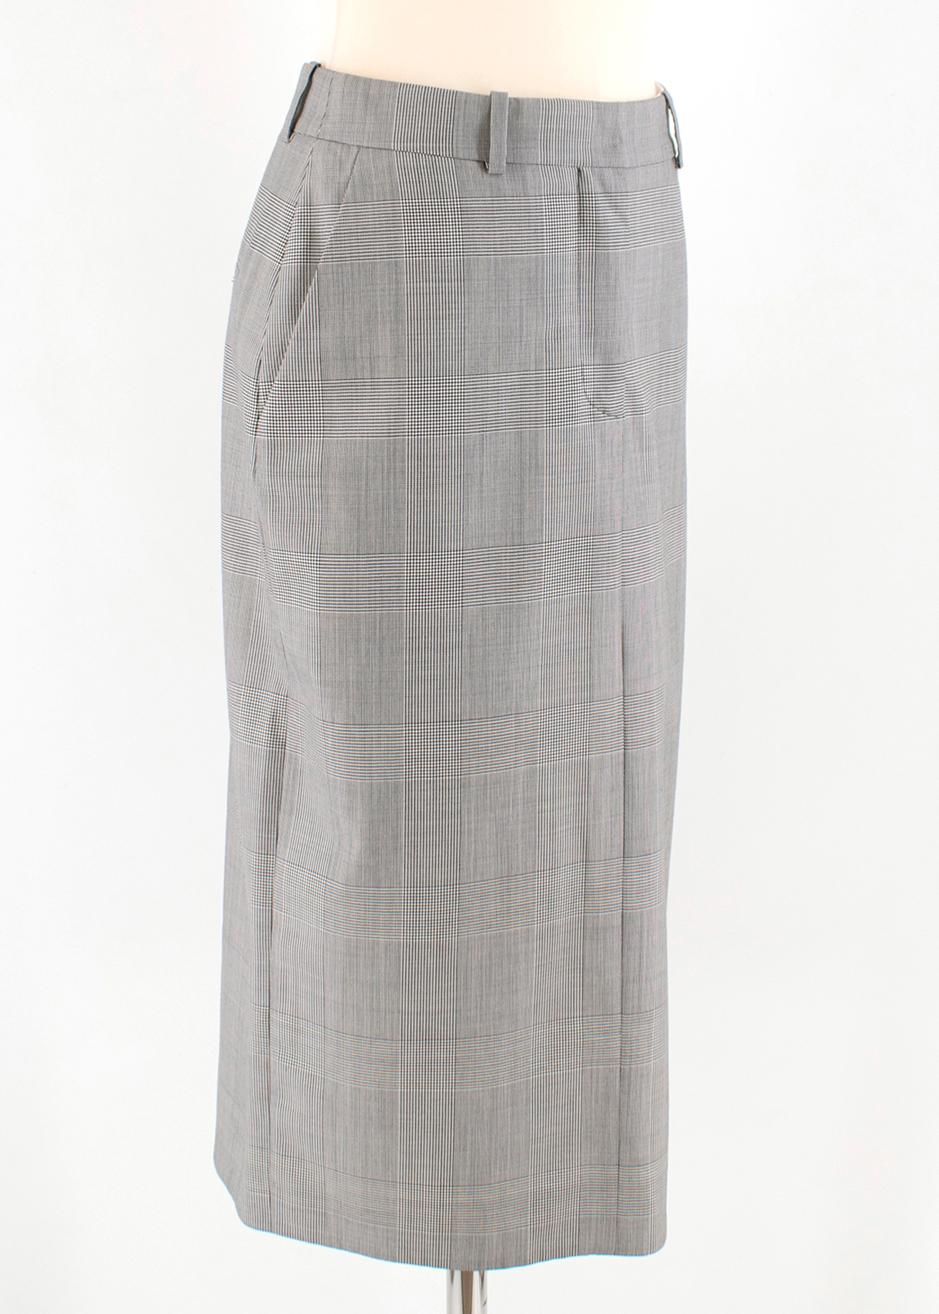 Calvin Klein 205W39NYC Prince of Wales Checked Pencil Skirt

- Grey, lightweight Prince of Wales checked wool
- High rise, midi length 
- One pocket on the hip
- Hemline vent
- Zip closure

Please note, these items are pre-owned and may show some